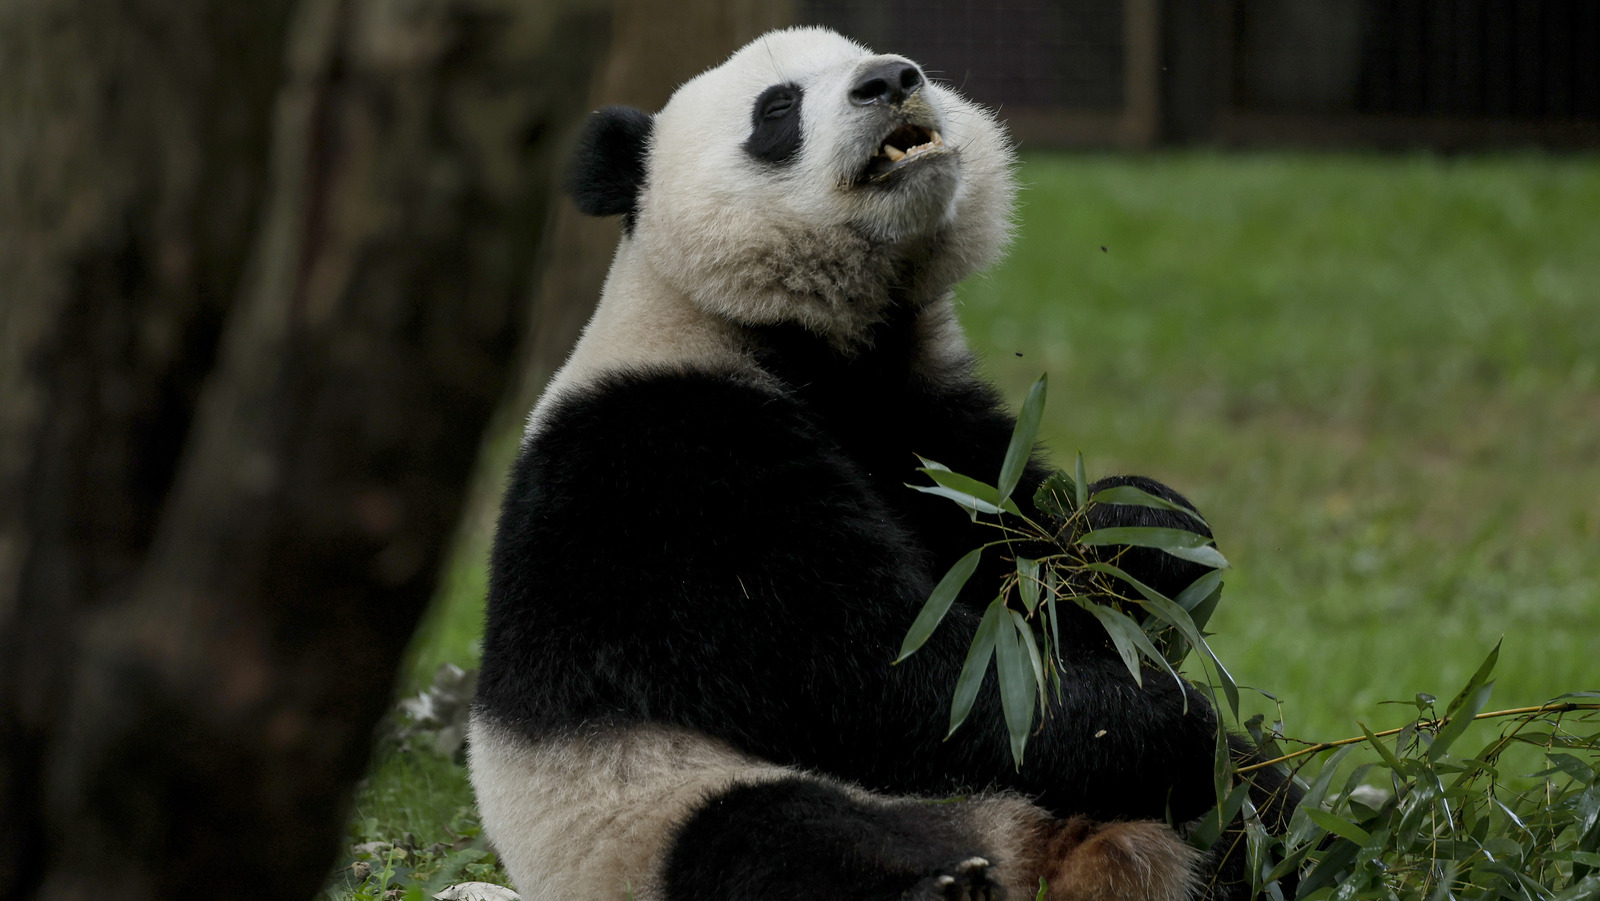 The Giant Panda Who Successfully Faked A Pregnancy To Receive Special Treatment